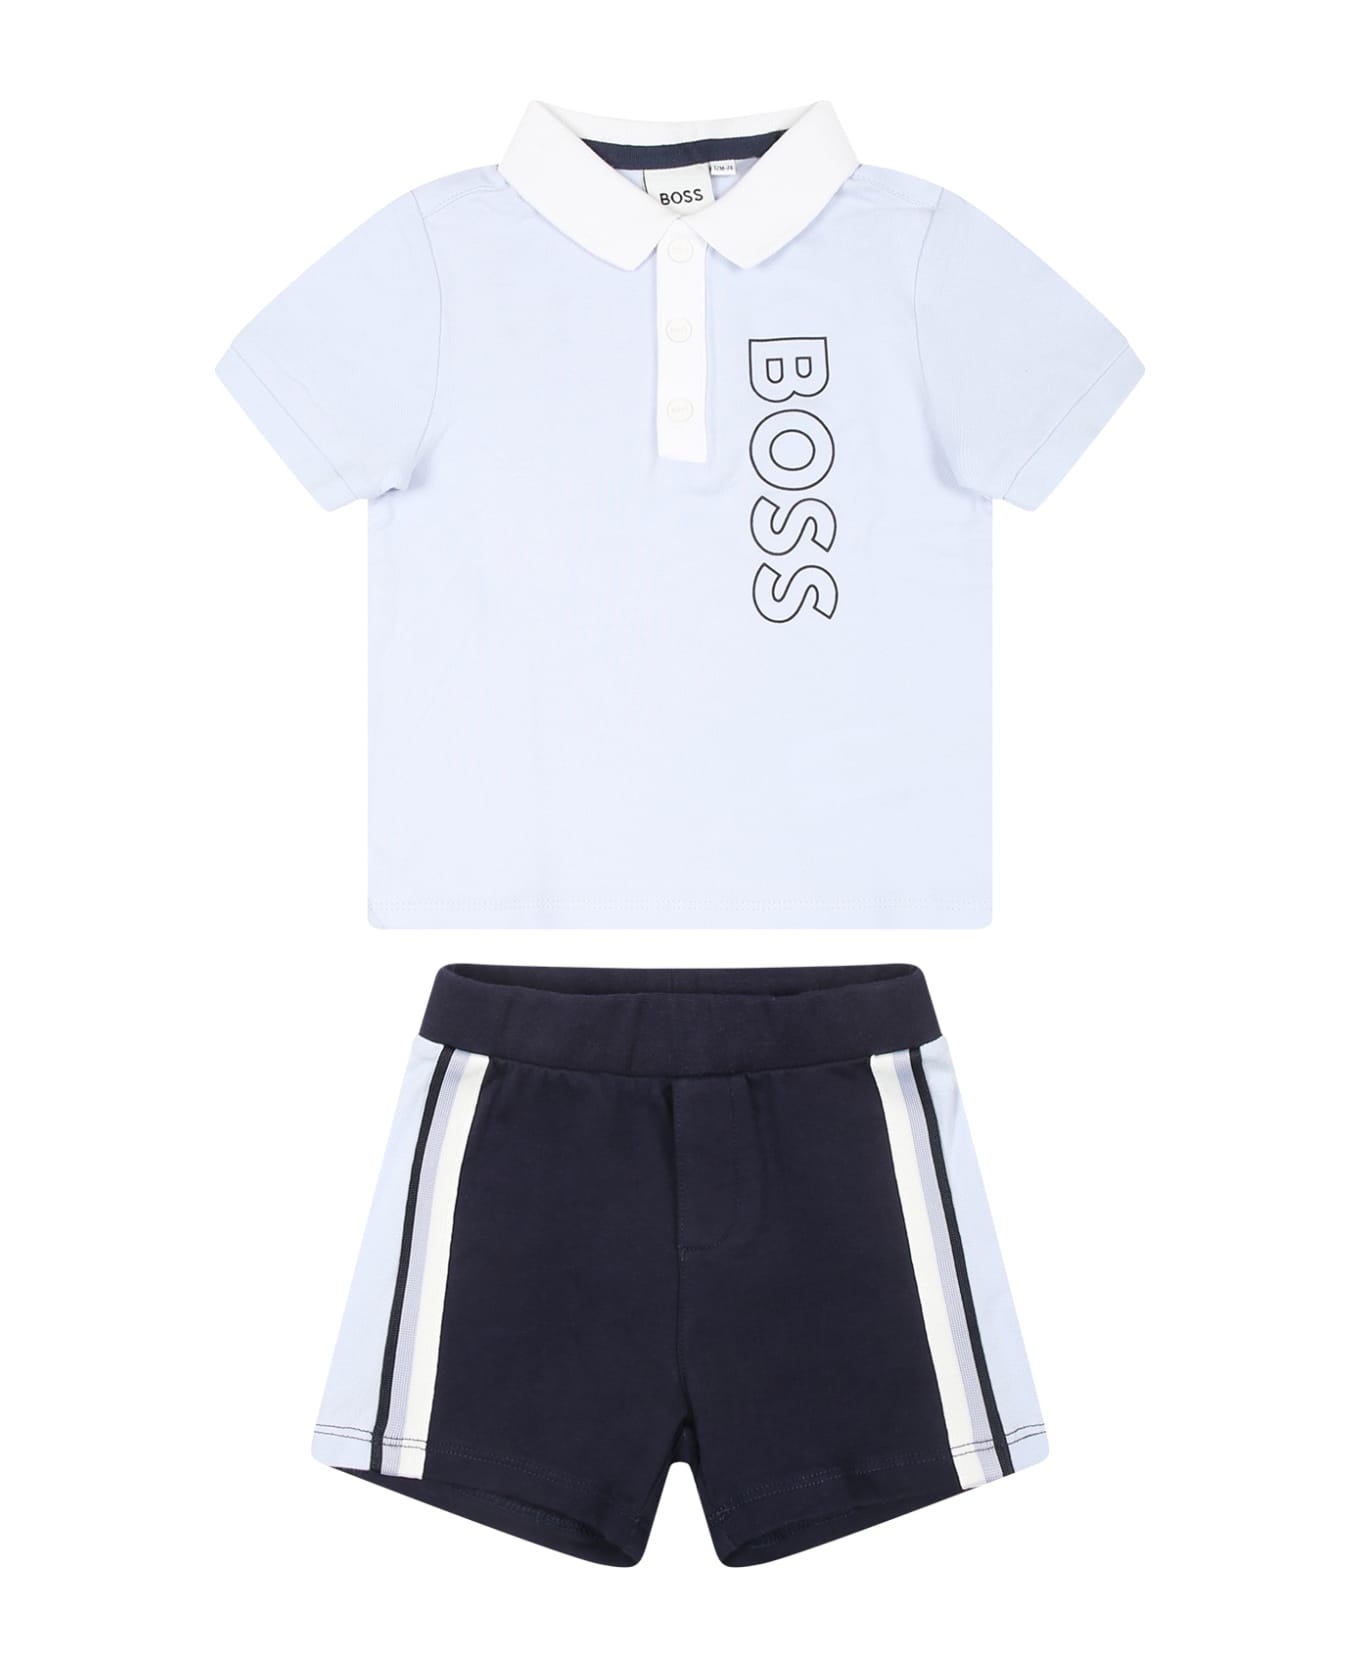 Hugo Boss Light Blue Suit For Baby Oy With Logo - Light Blue ボトムス